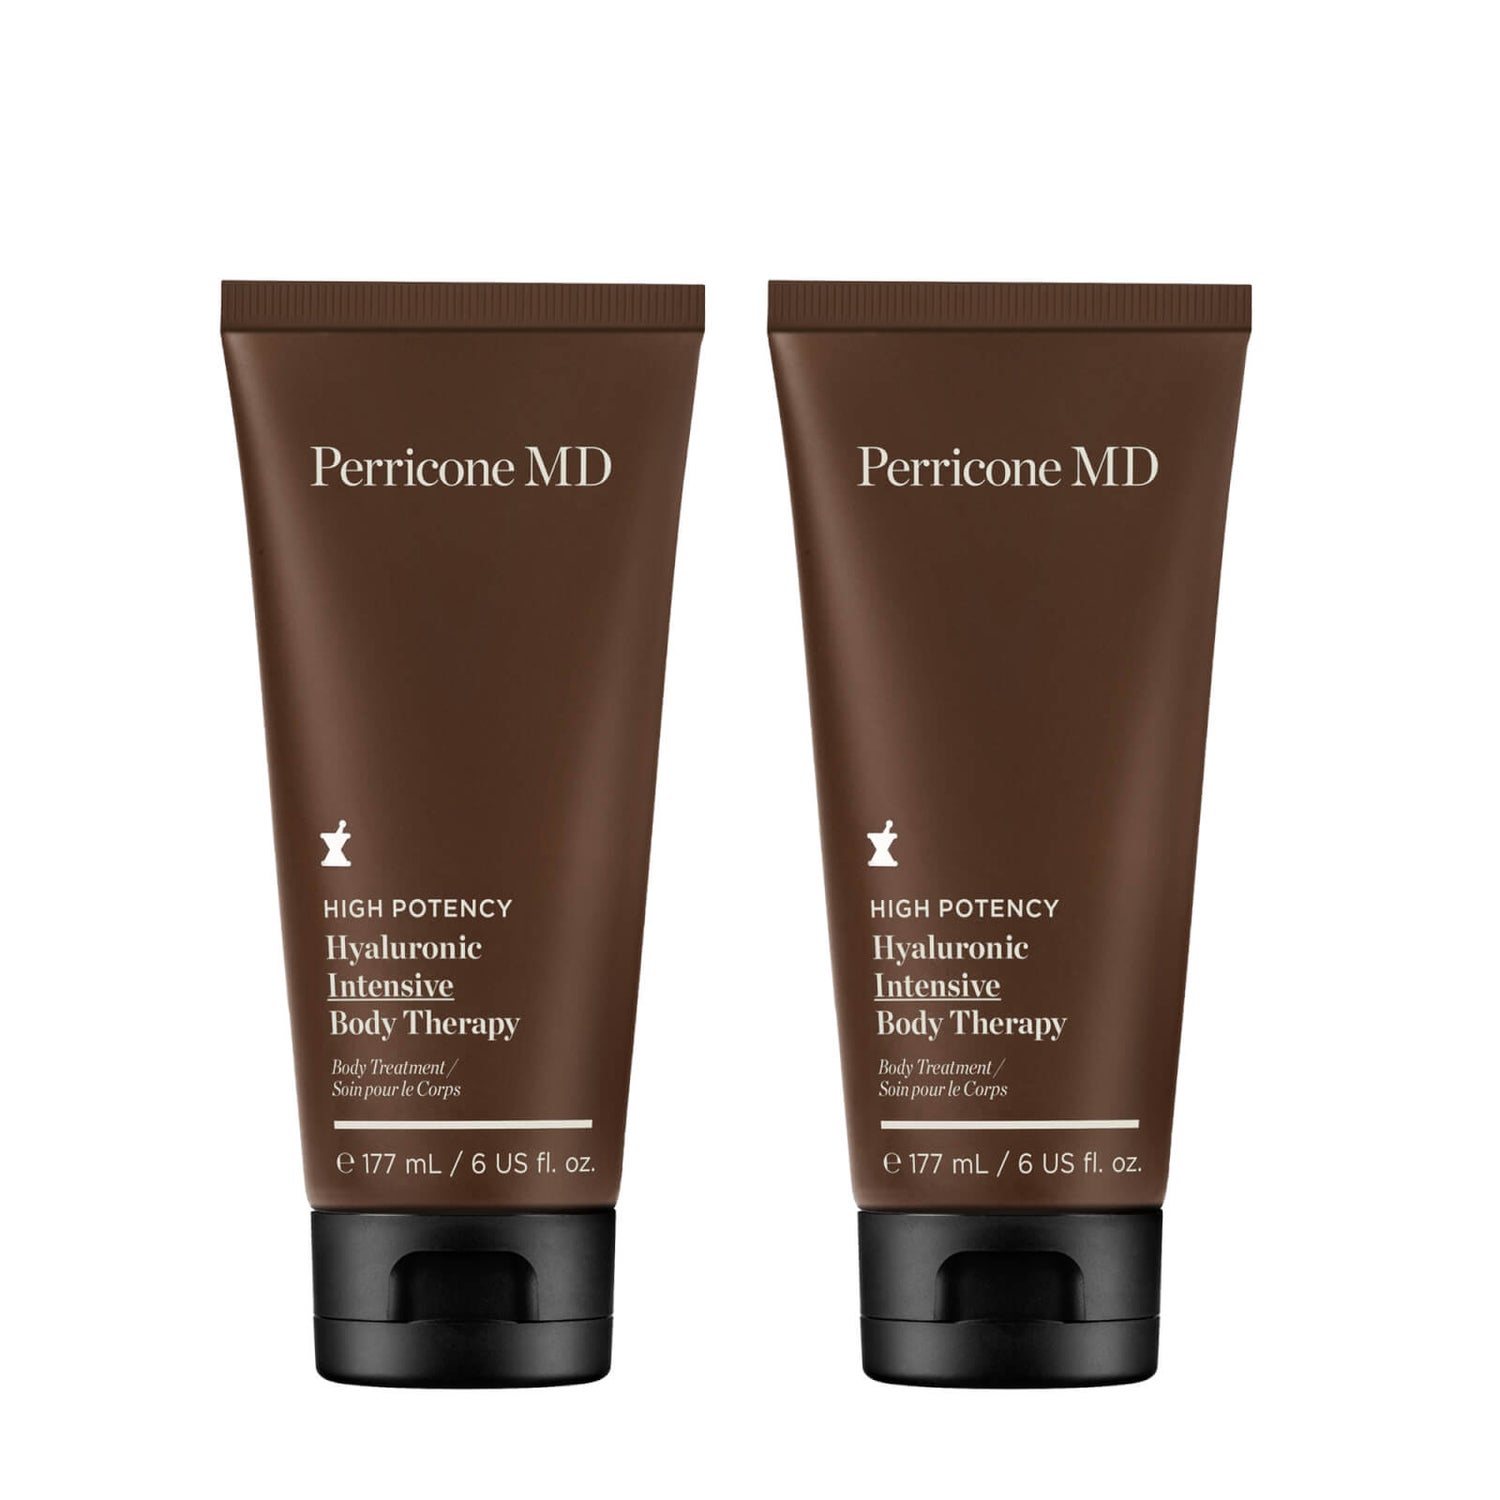 High Potency Hyaluronic Intensive Body Therapy Duo